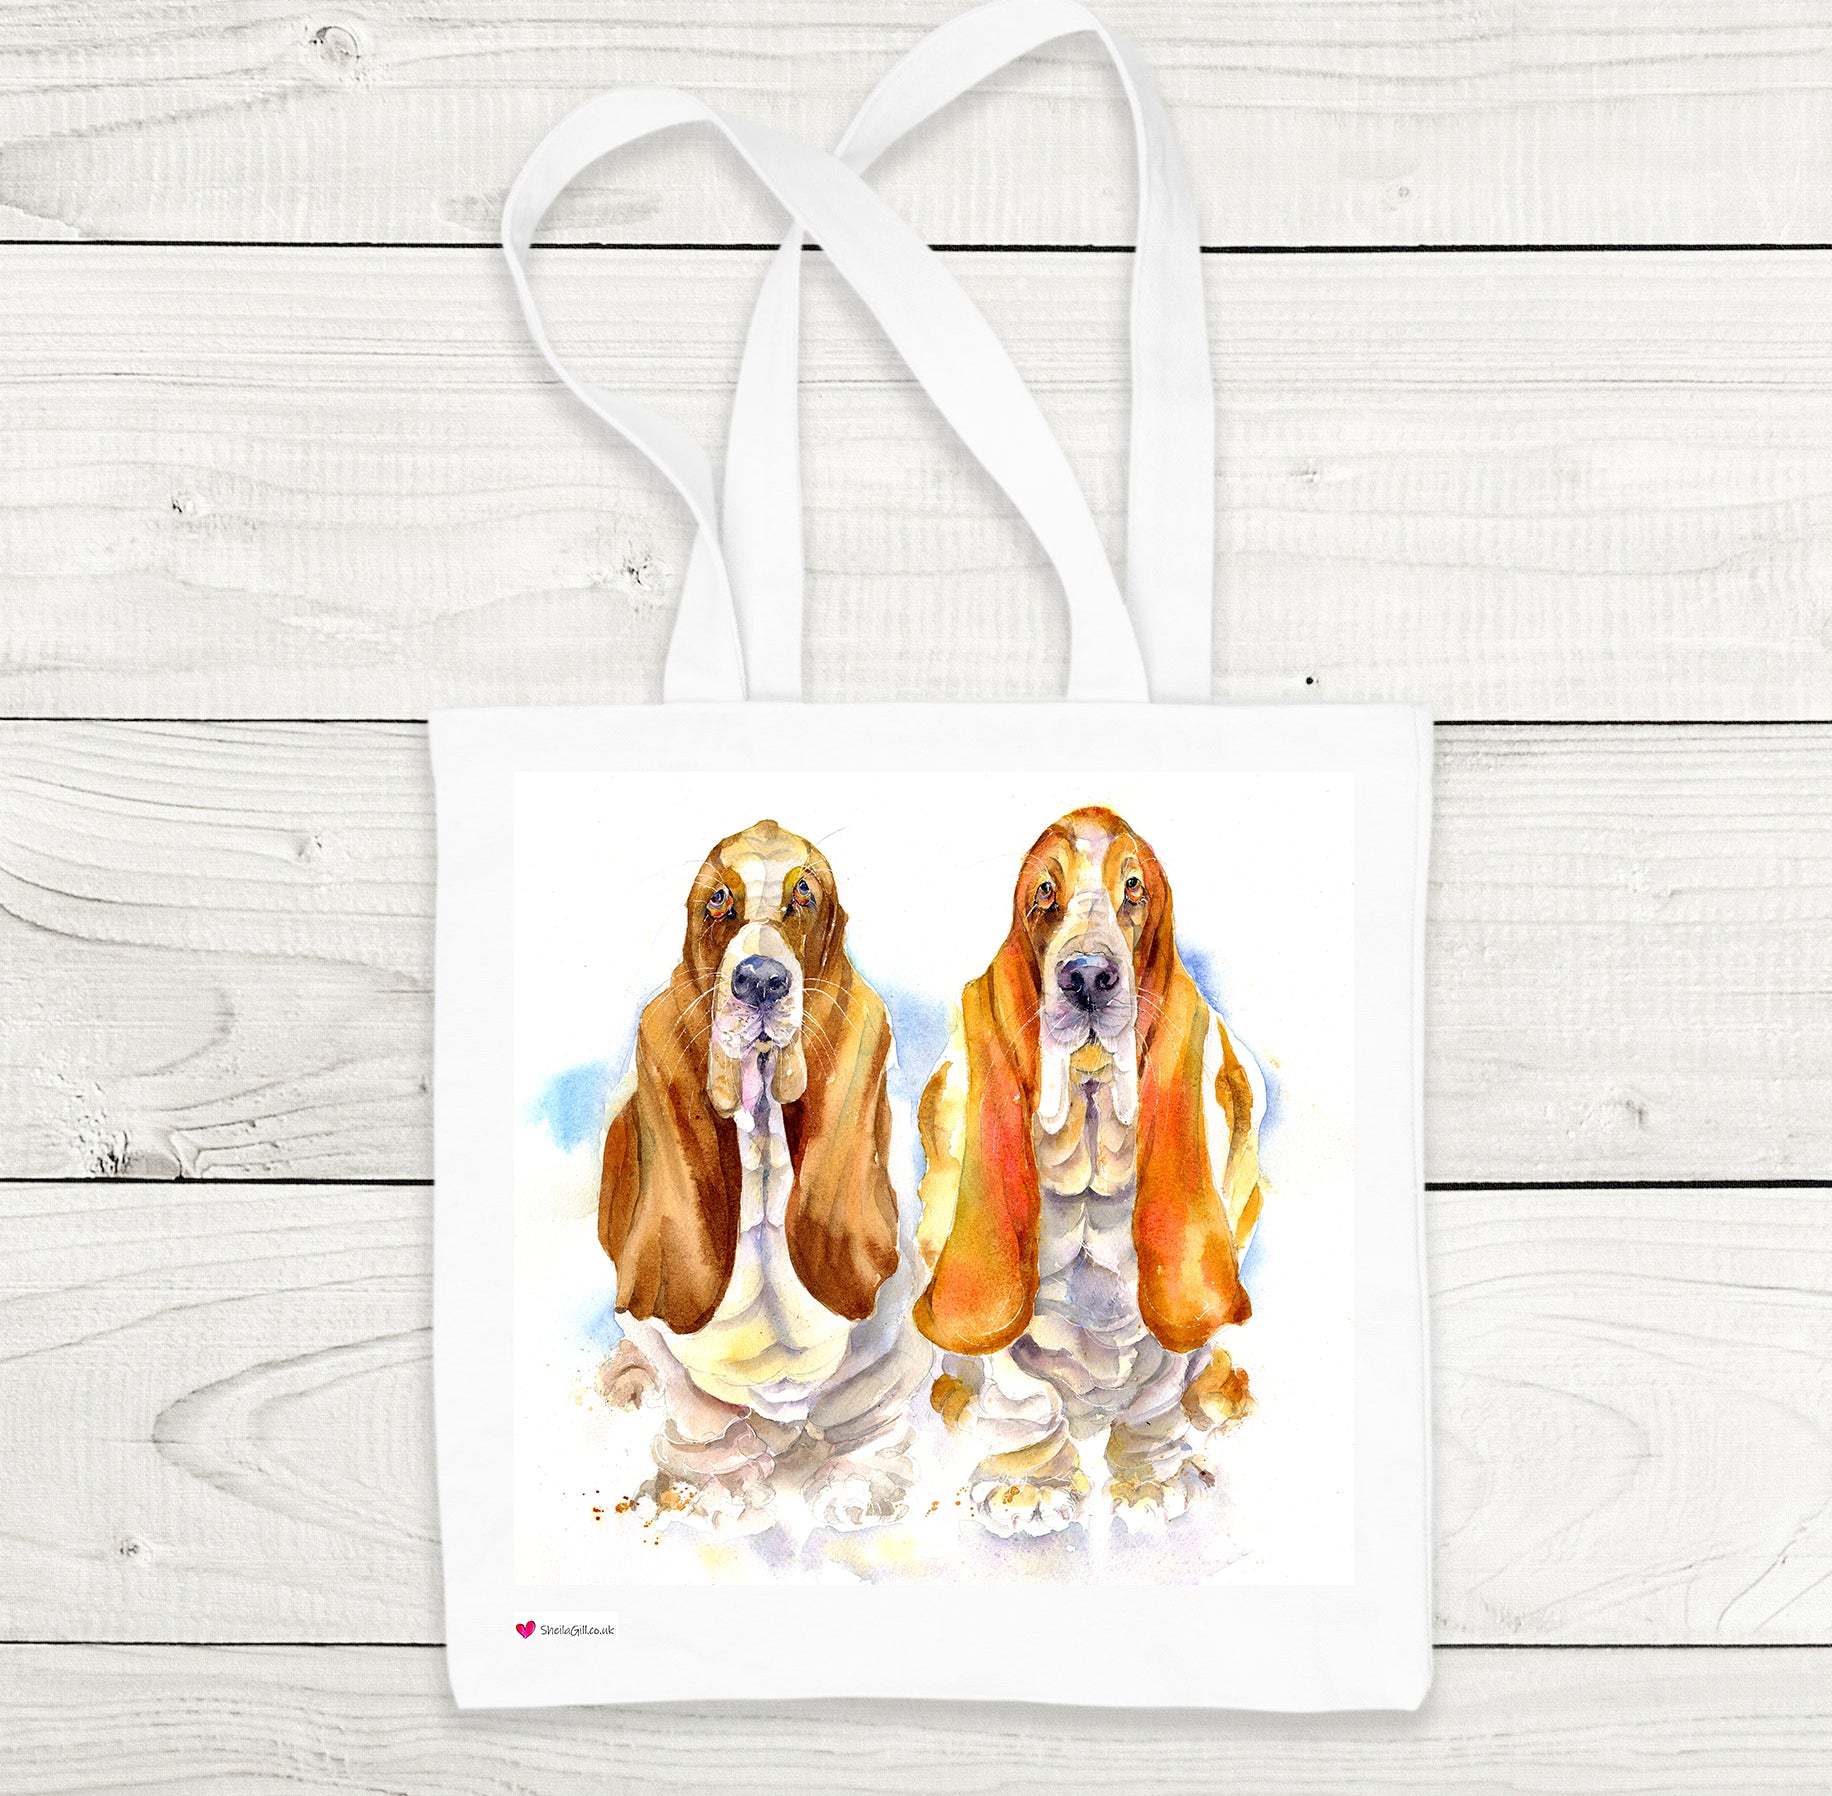 Two Basset Hounds Printed on a White Tote Bag